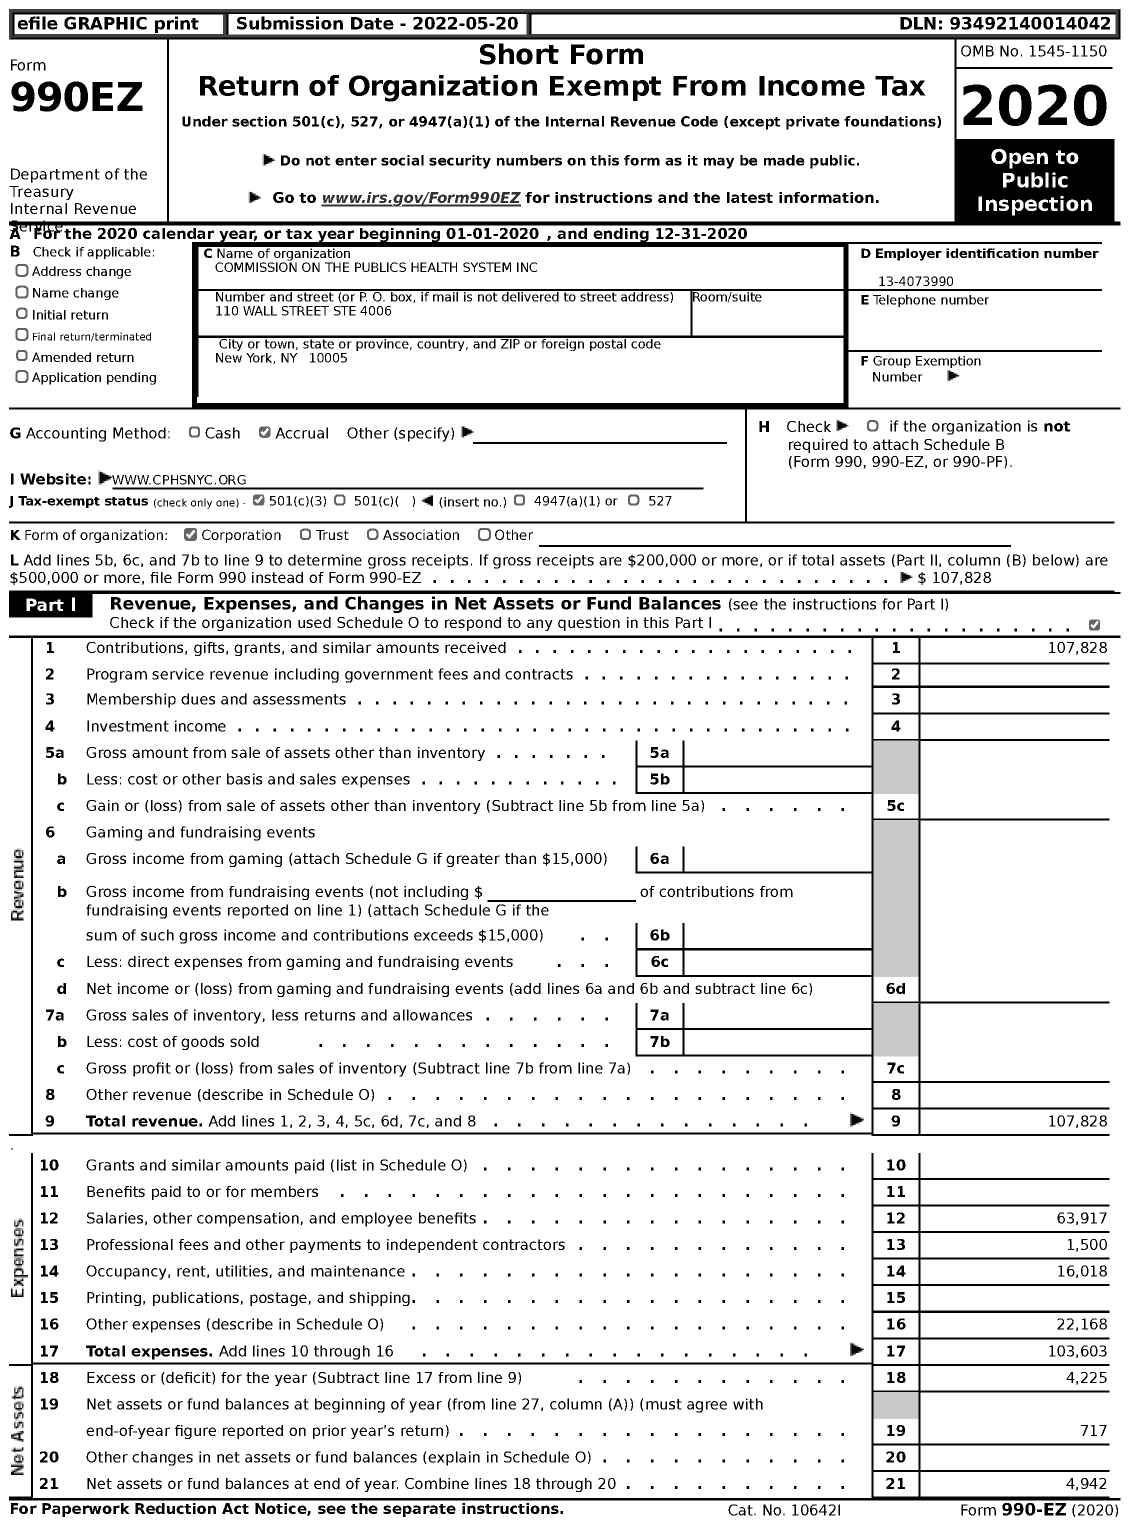 Image of first page of 2020 Form 990EZ for Commission on the Publics Health System